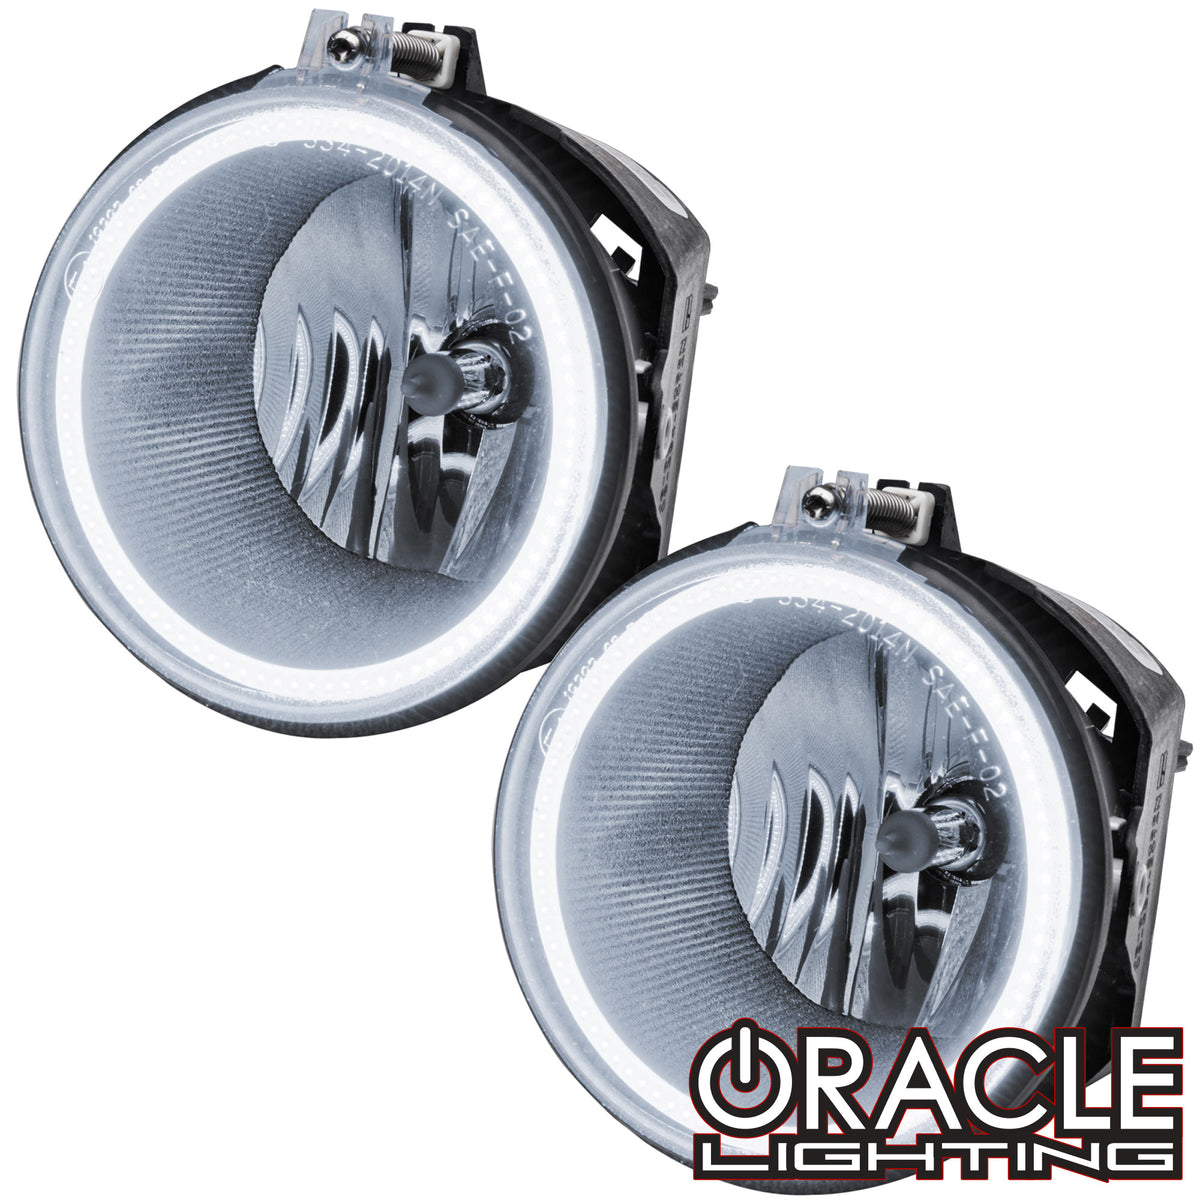 ORACLE Lighting 2005-2010 Jeep Grand Cherokee Pre-Assembled Halo Fog L